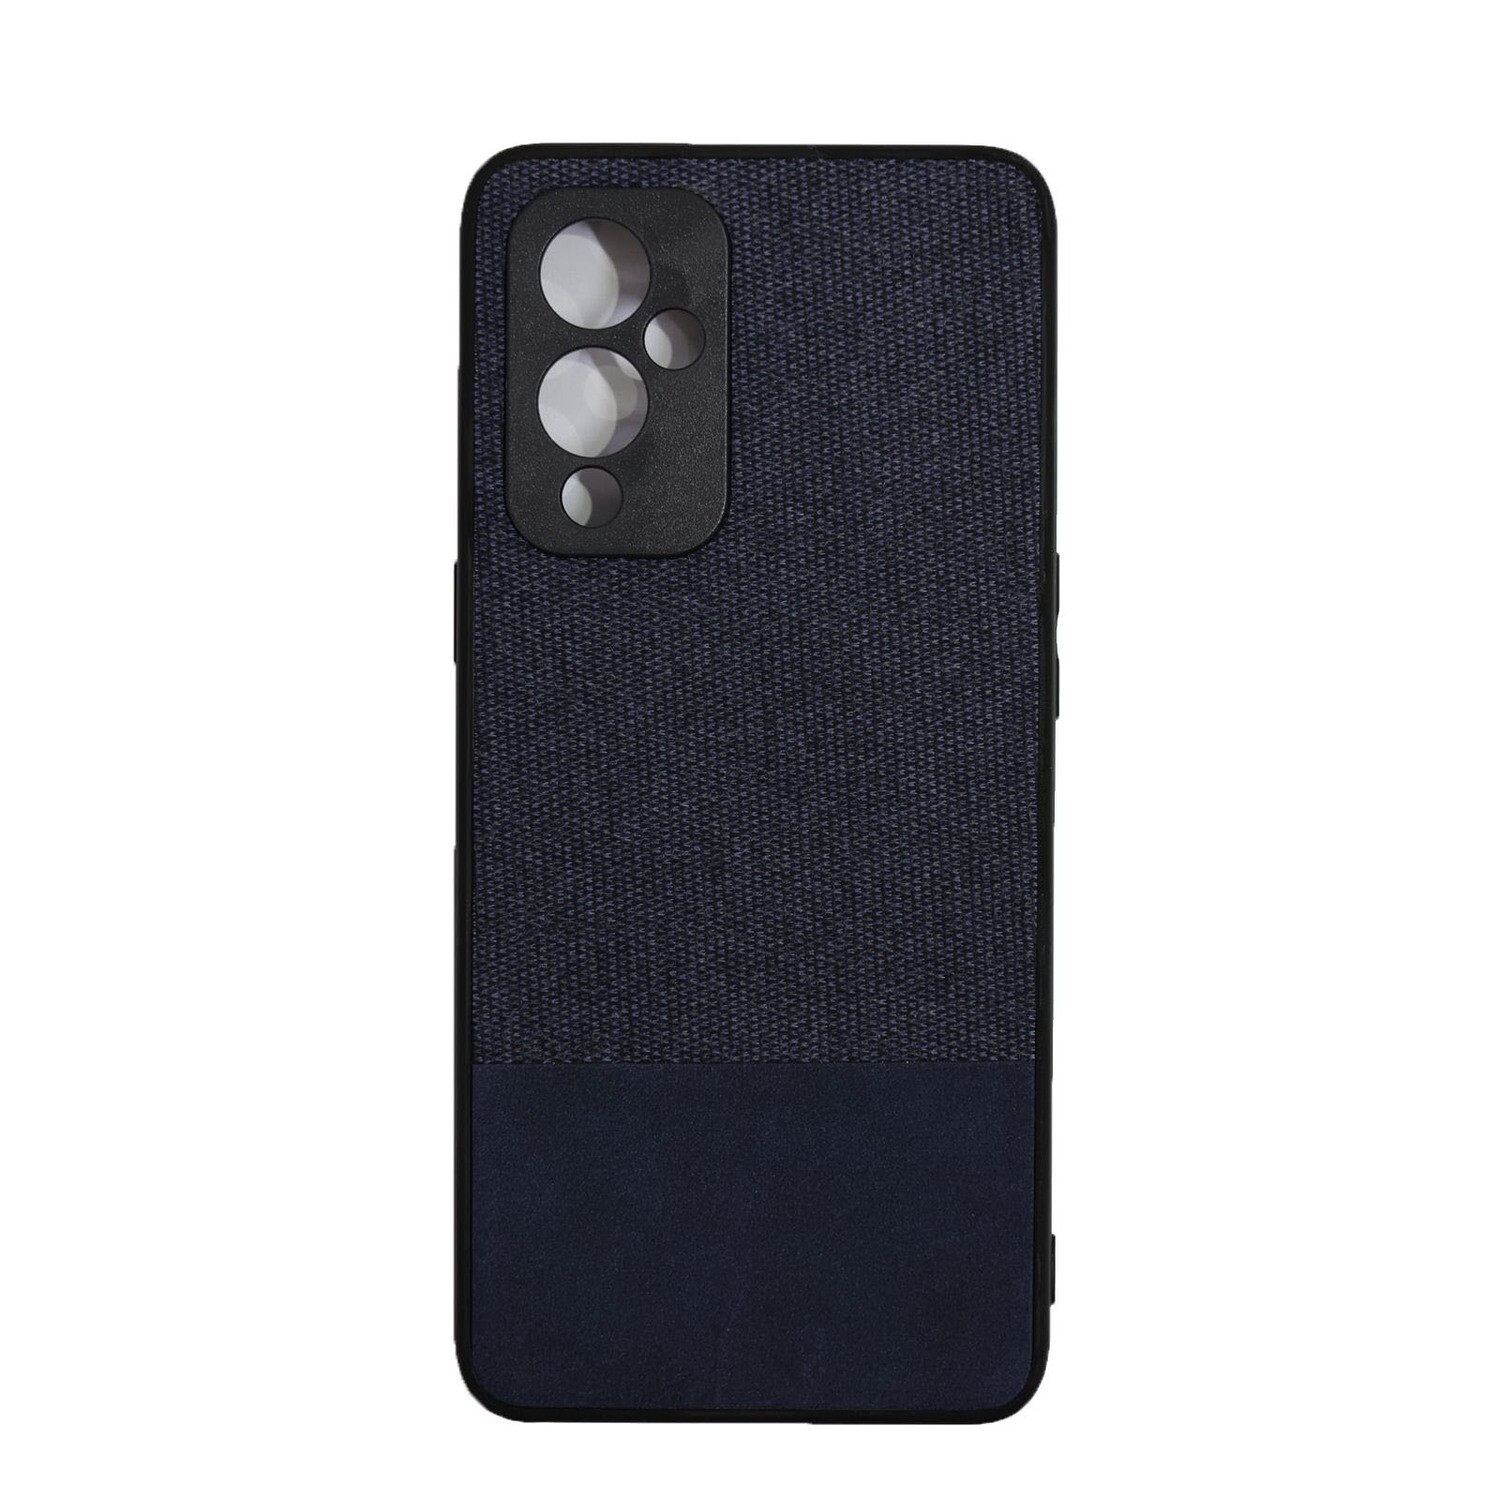 My Choice Full Protection Case for OnePlus 9, Color: Blue